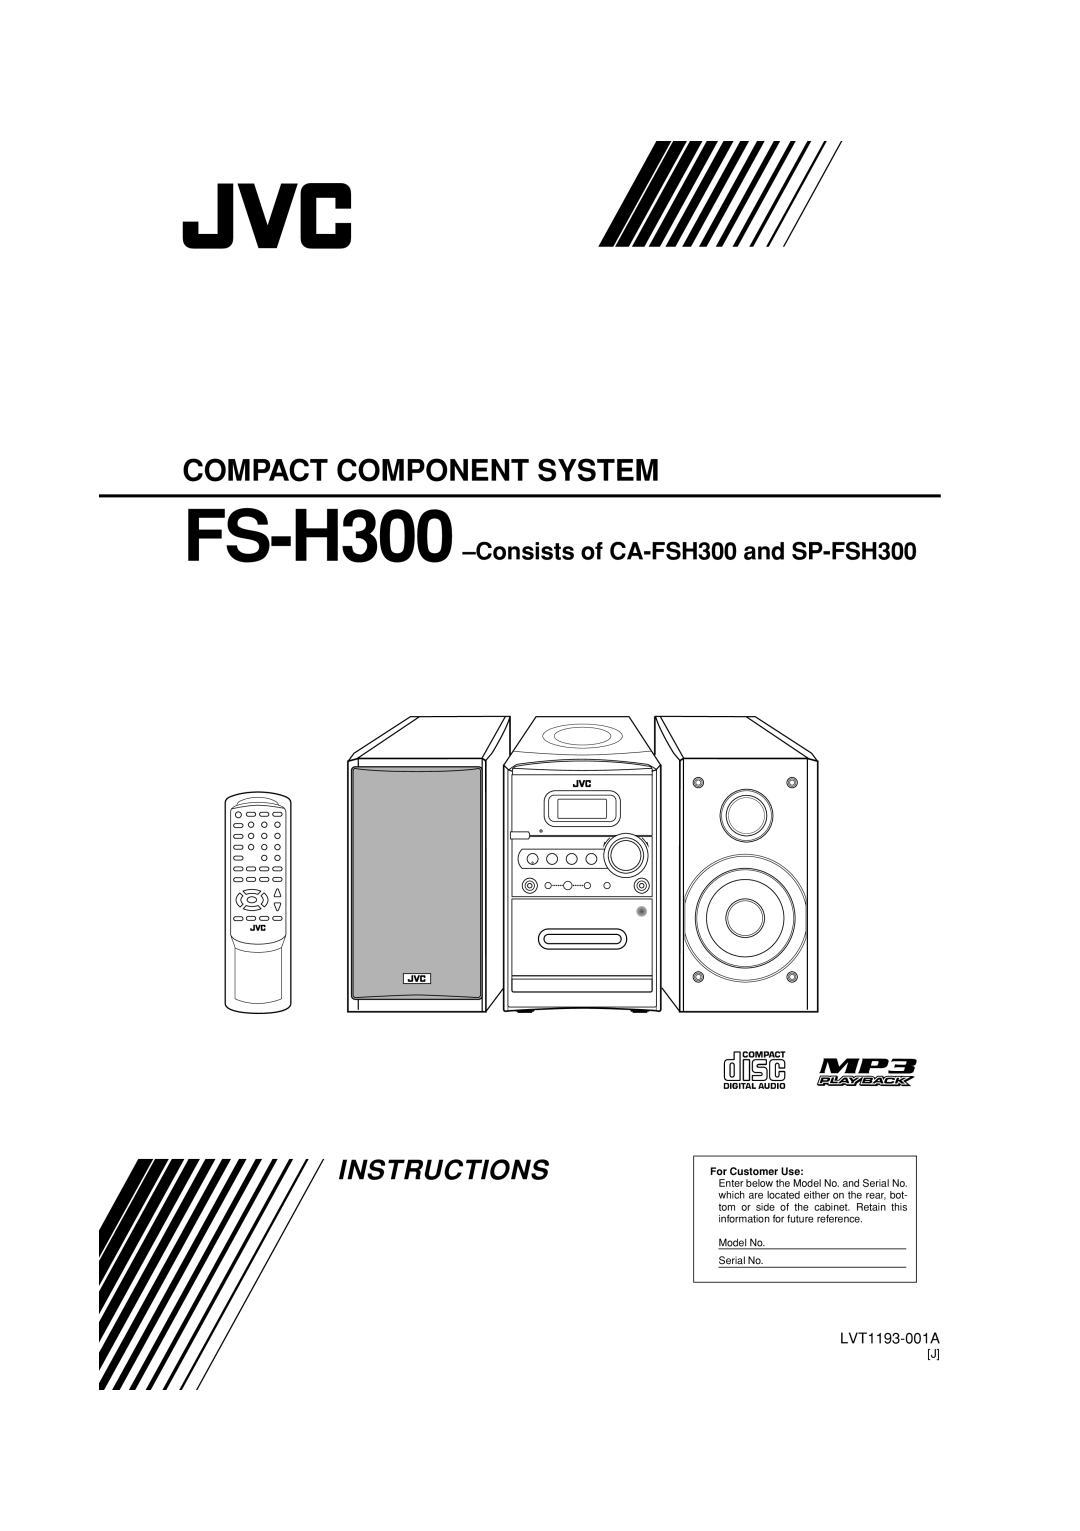 JVC manual Instructions, Compact Component System, FS-H300 -Consistsof CA-FSH300and SP-FSH300, LVT1193-001A 